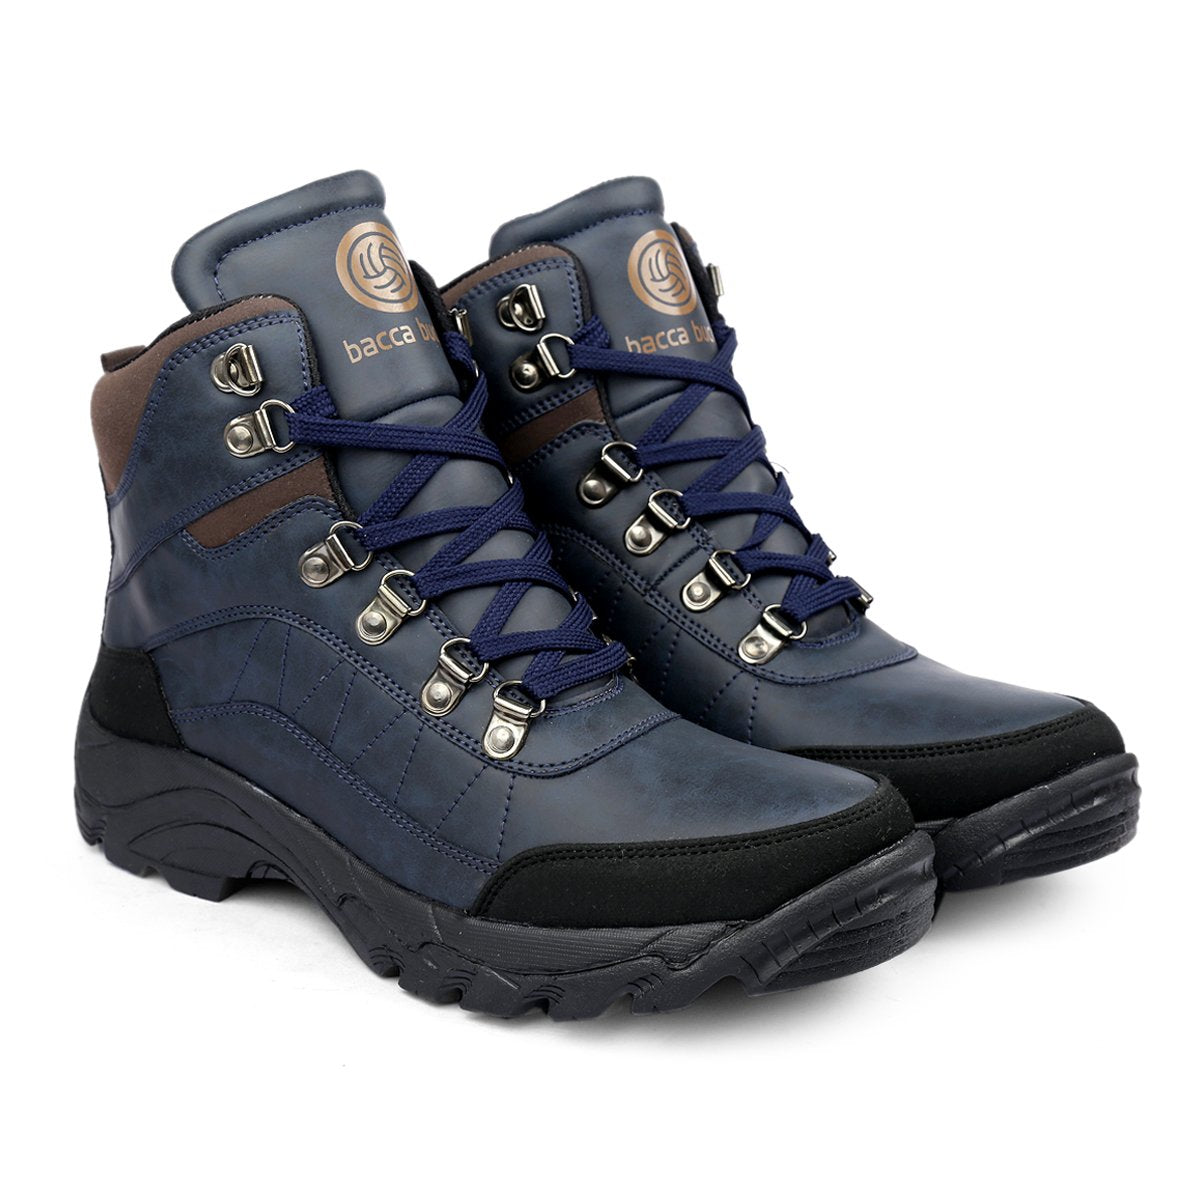  best snow boots, mens waterproof boots, high top ankle boots 